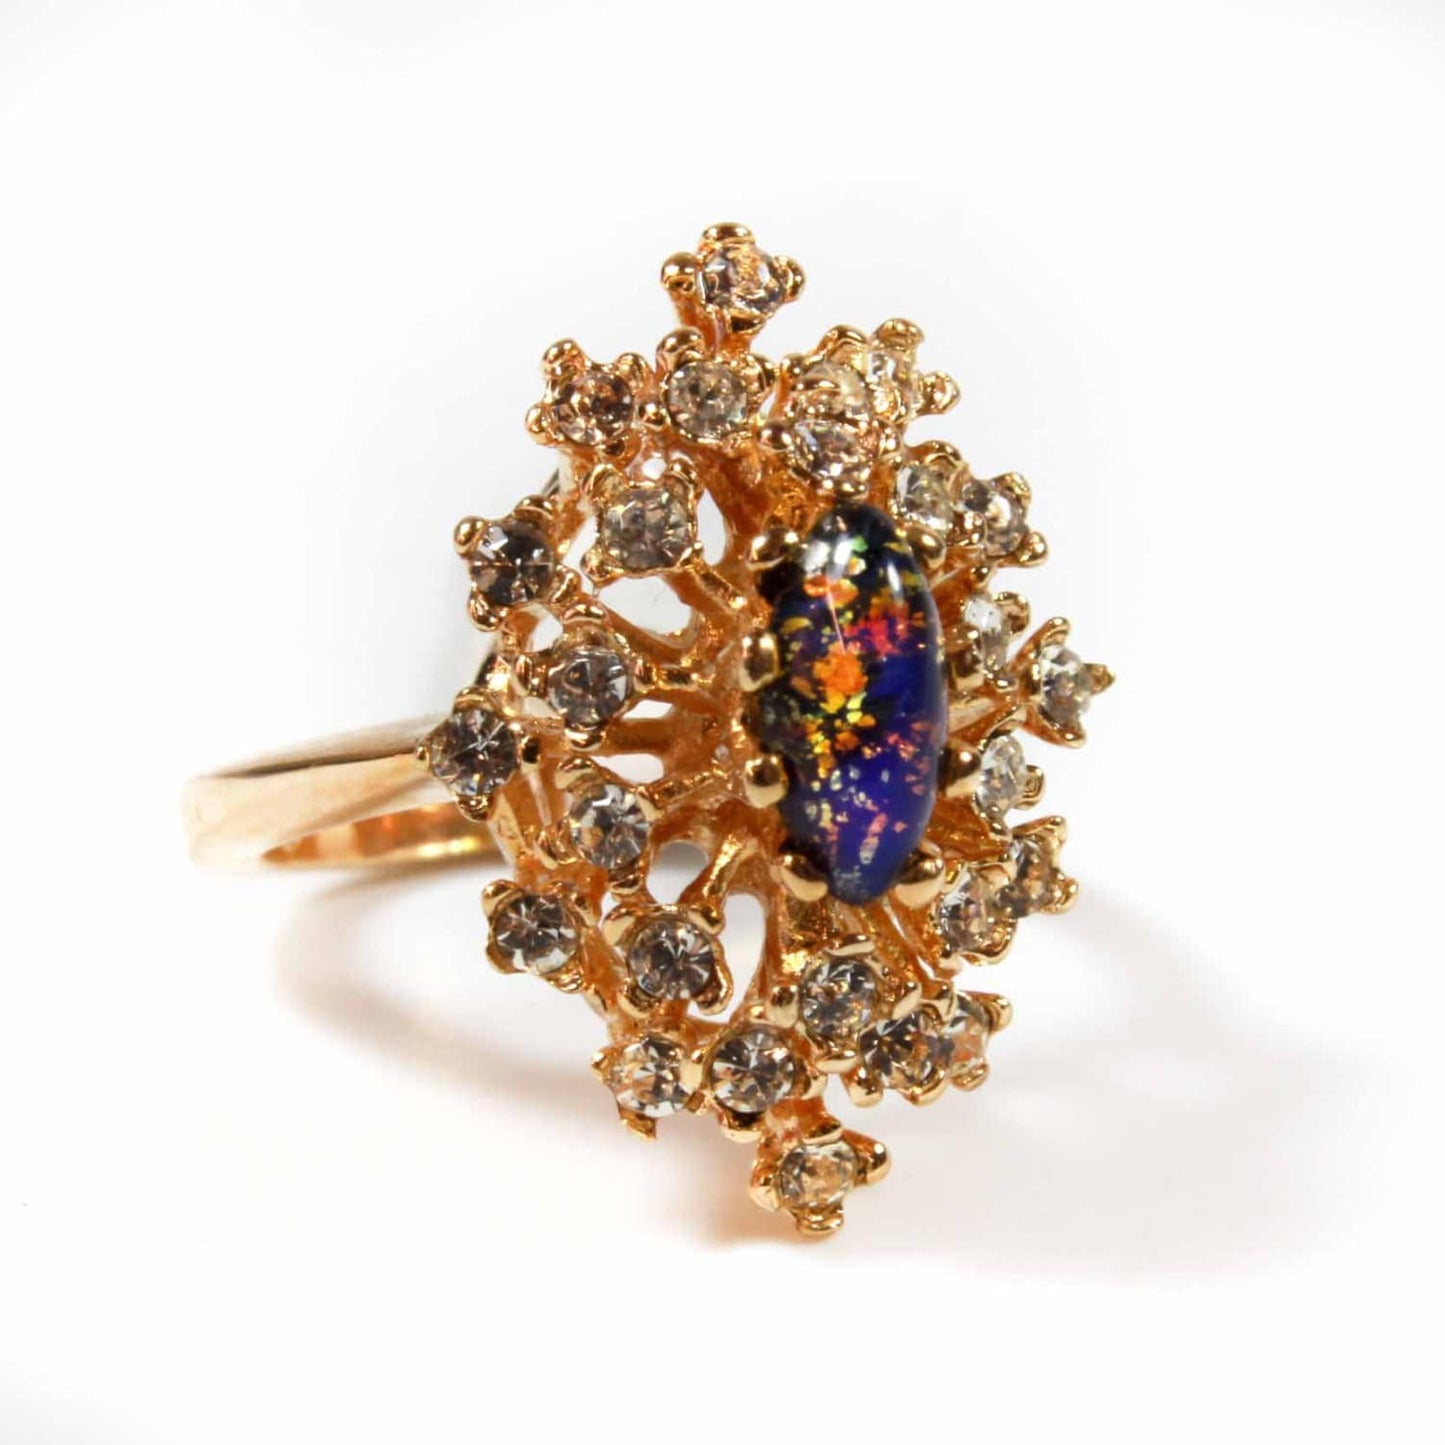 Vintage Ring 1970s Harlequin Opal Clear Swarovski Crystals 18kt Gold Cocktail Ring Antique Womans Jewlery #R221 - Limited Stock - Never Worn